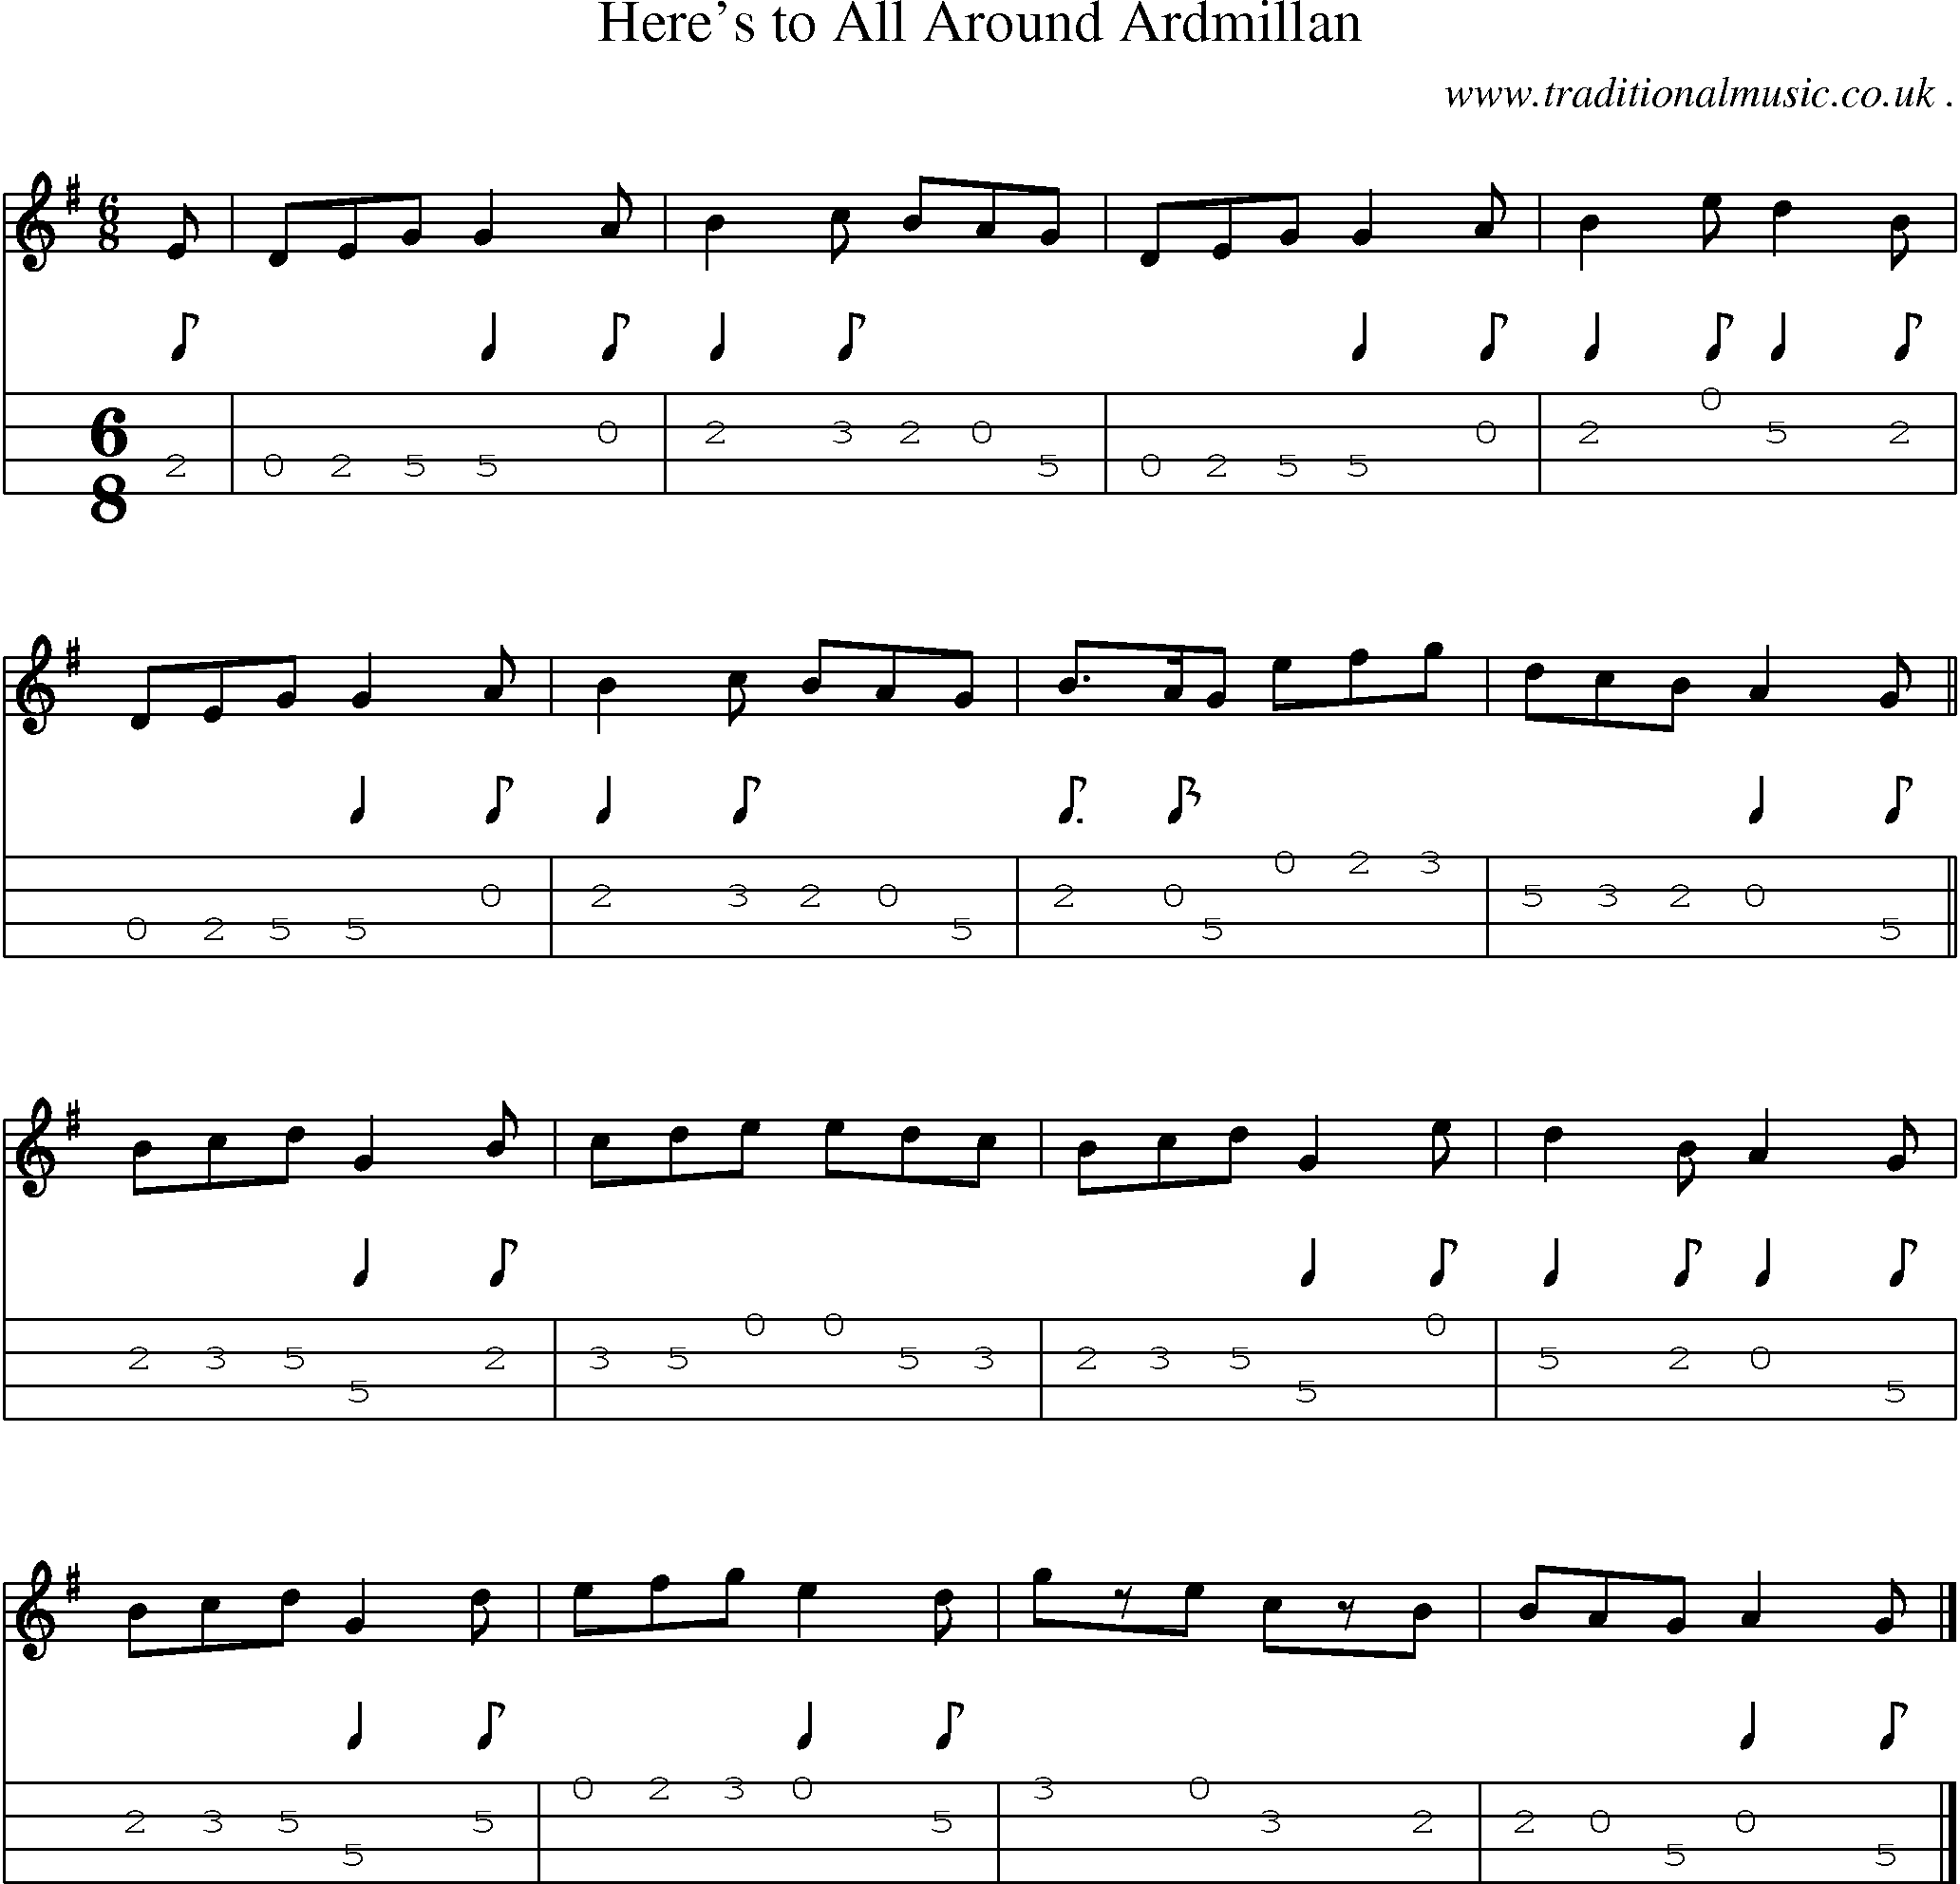 Sheet-music  score, Chords and Mandolin Tabs for Heres To All Around Ardmillan